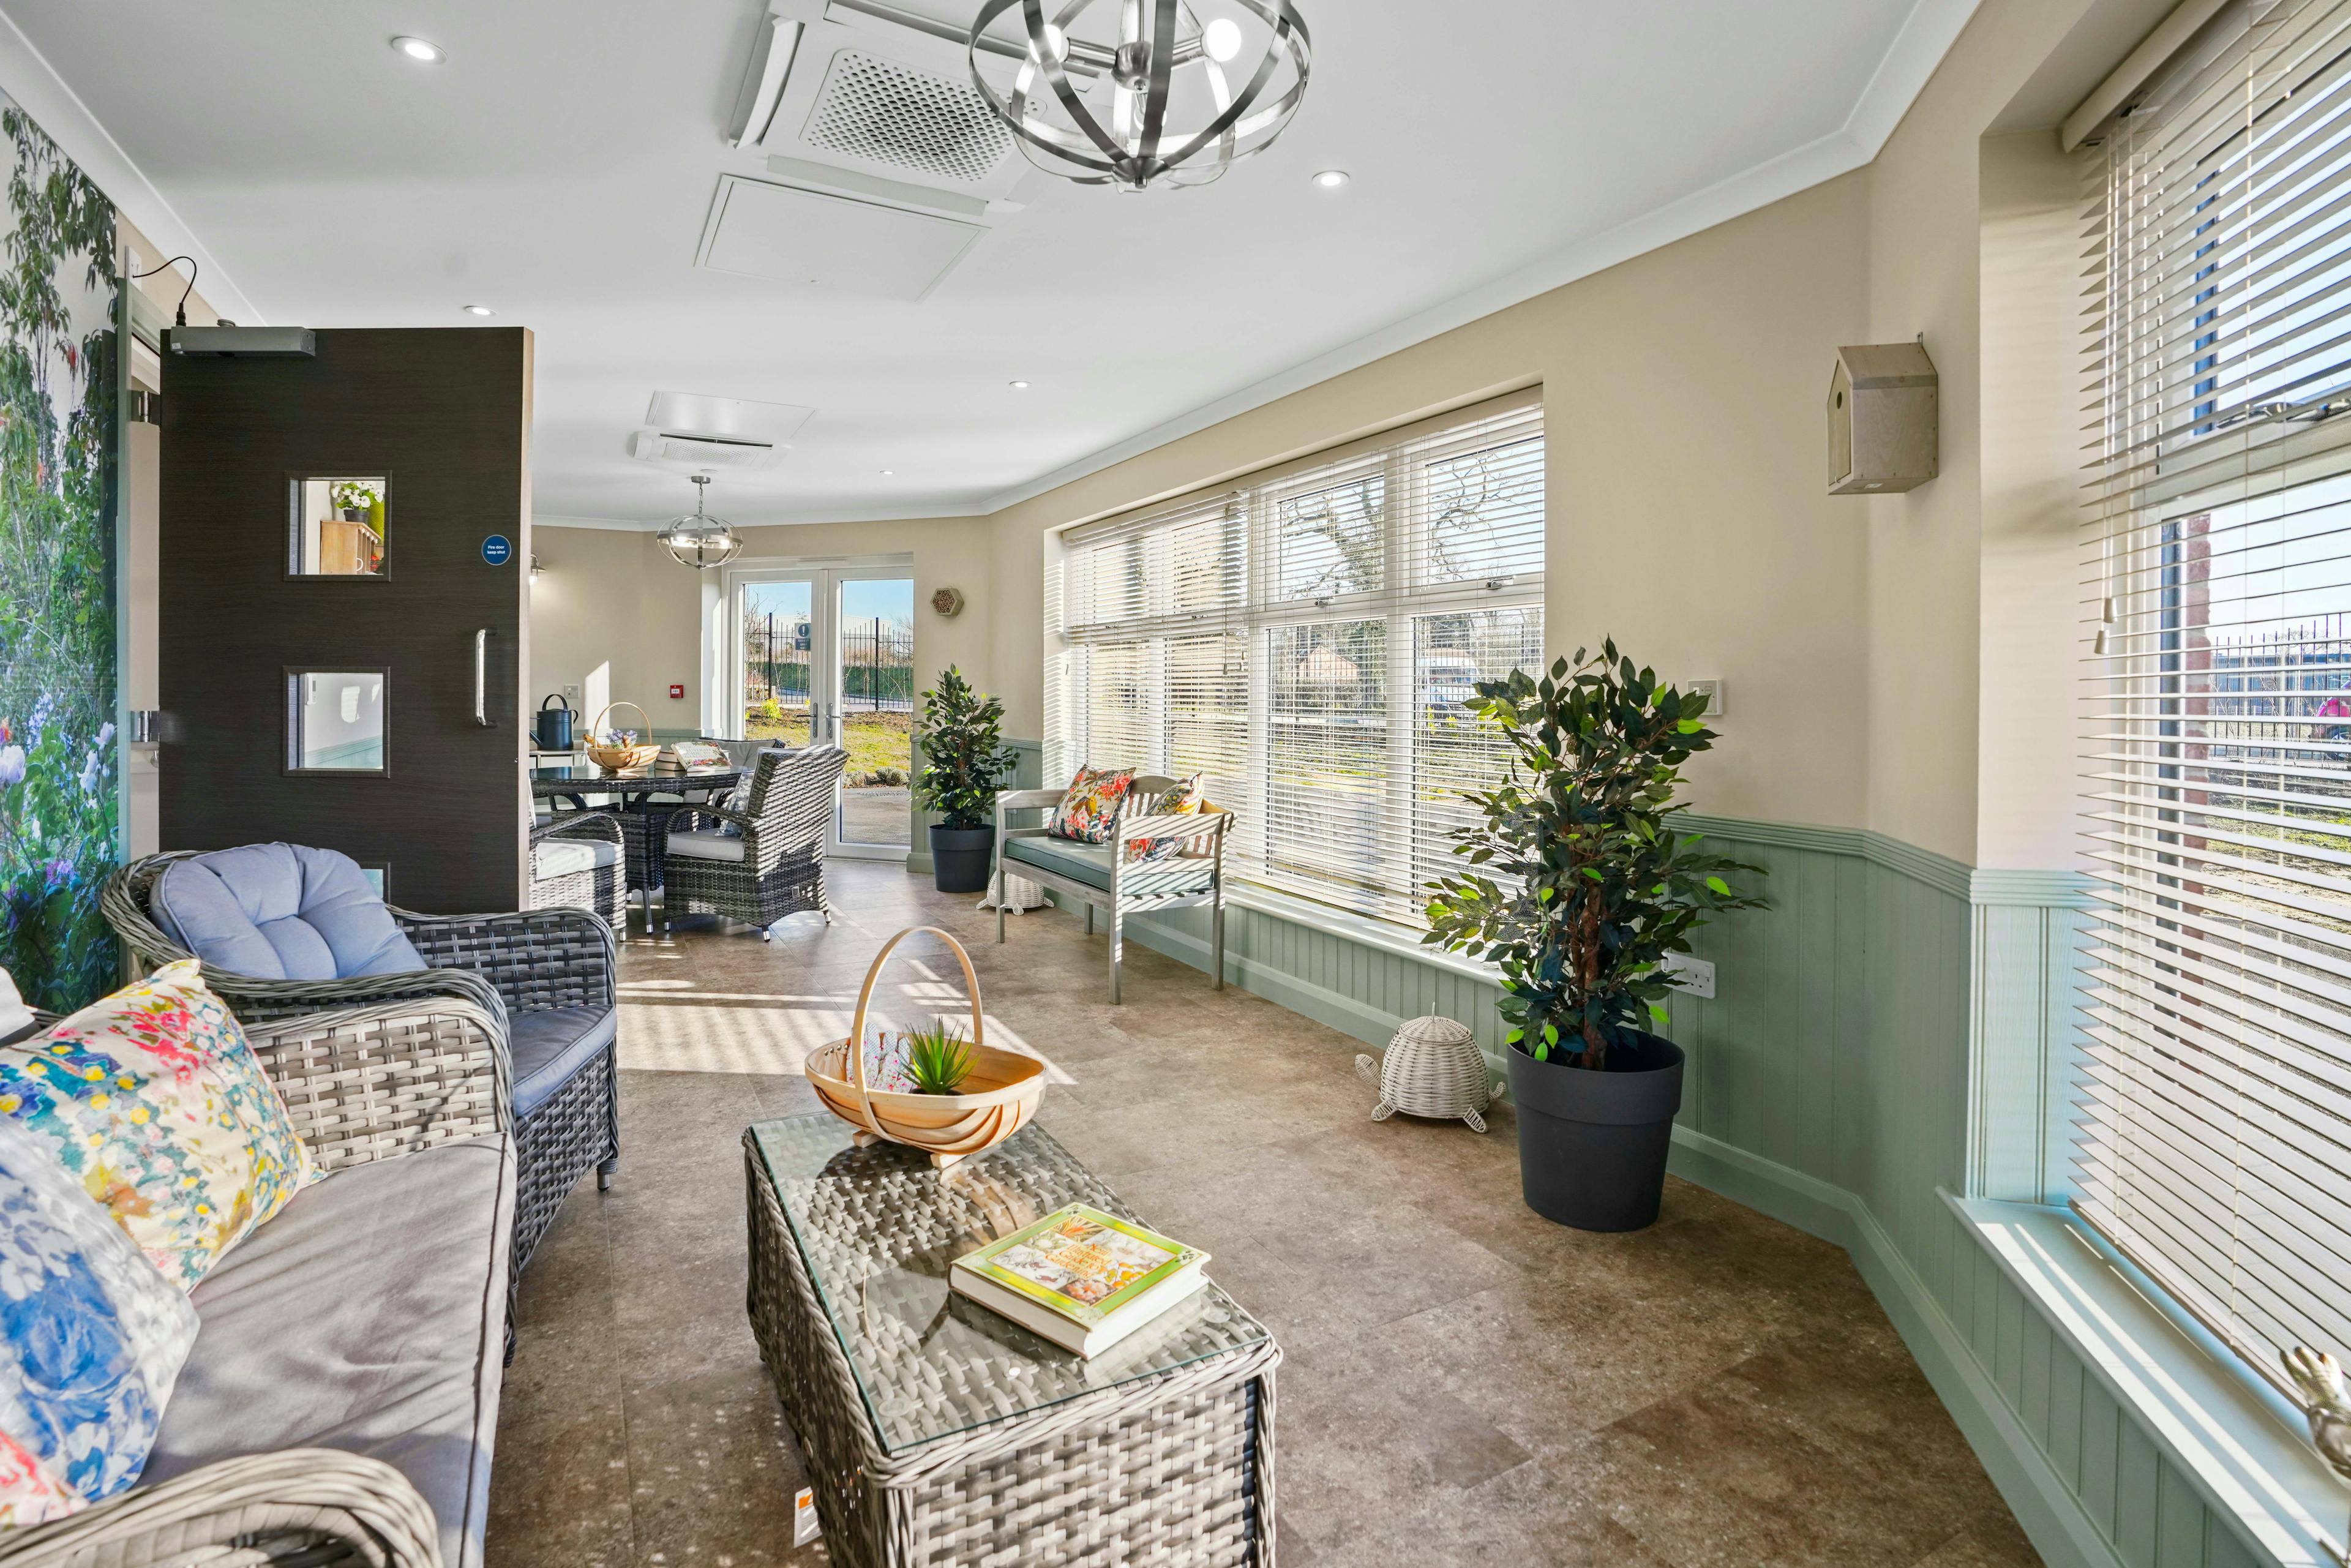 Garden room of Cloverleaf care home in Lincoln, Lincolnshire